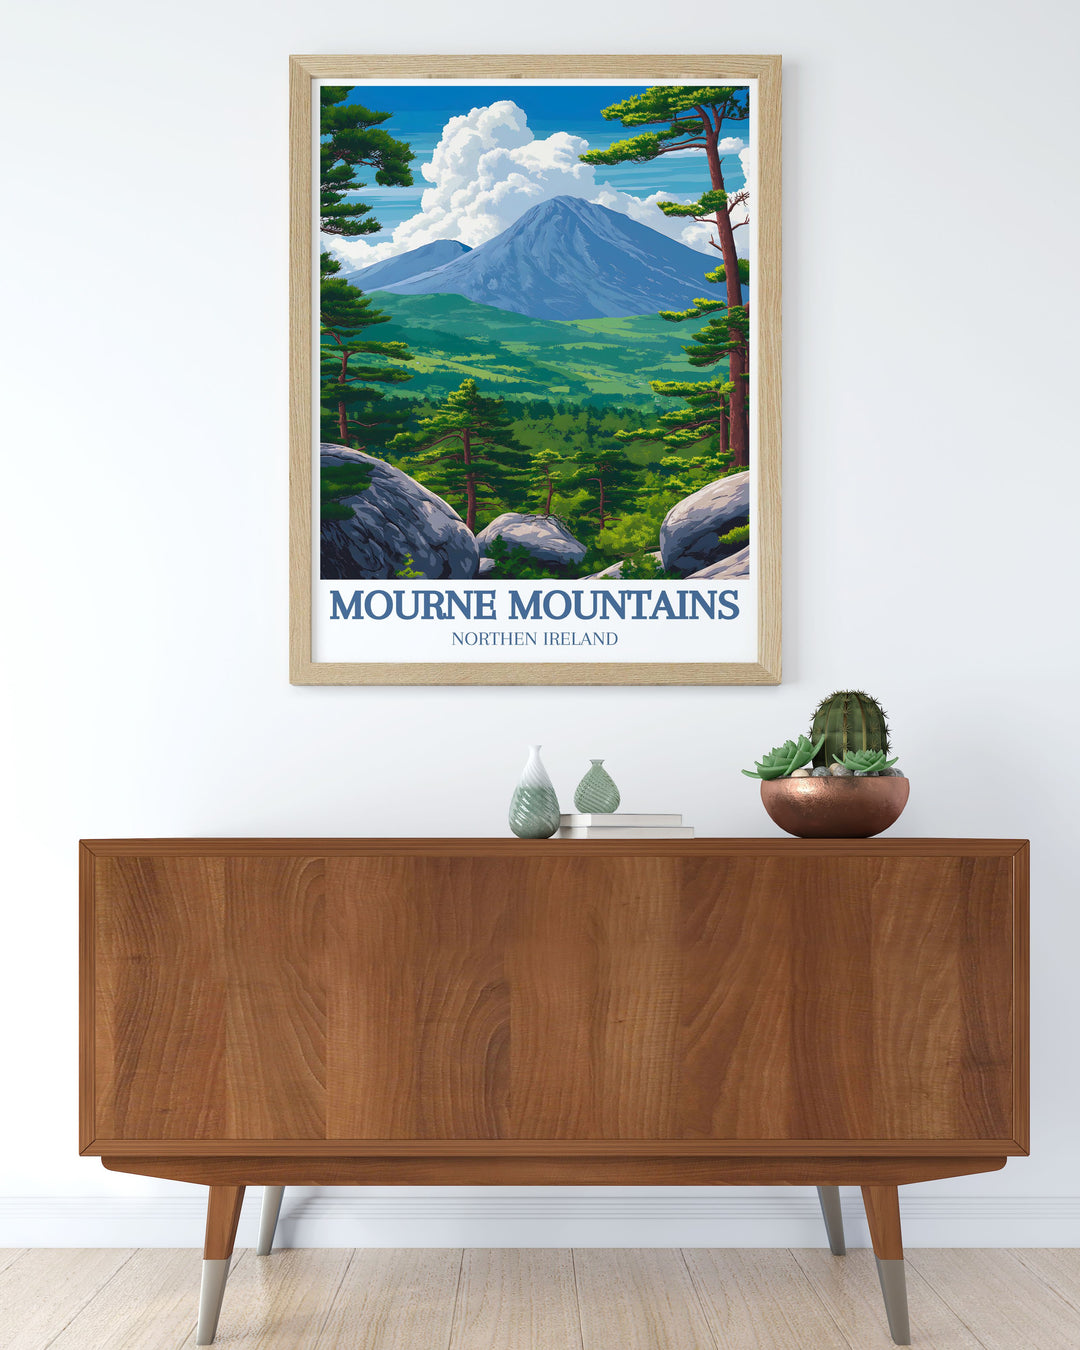 Showcasing both the rugged peaks and hidden valleys of the Mourne Mountains, this travel poster captures the unique blend of dramatic landscapes and serene retreats, perfect for enhancing your living space with natural charm.